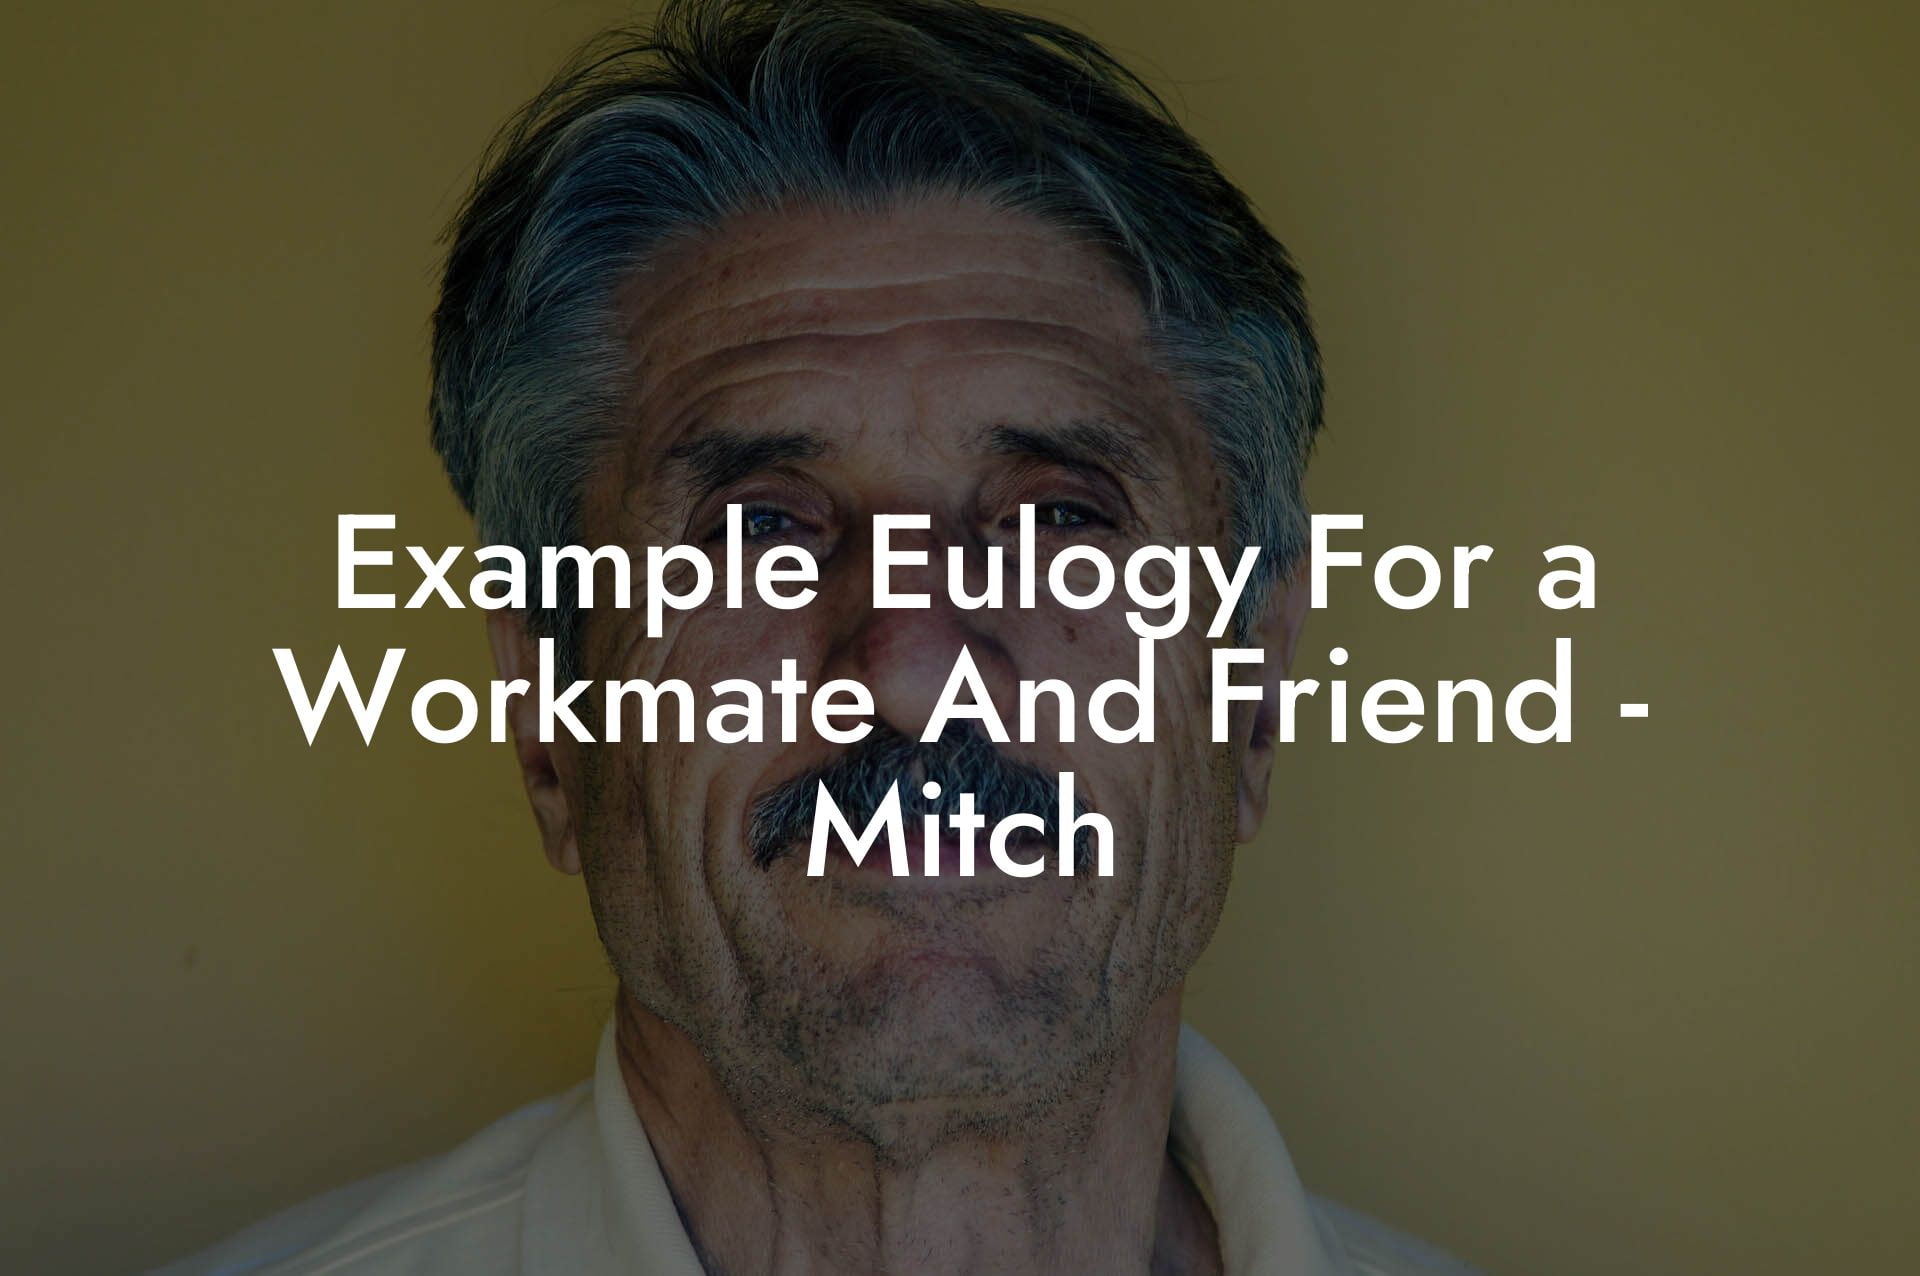 Example Eulogy For a Workmate And Friend - Mitch